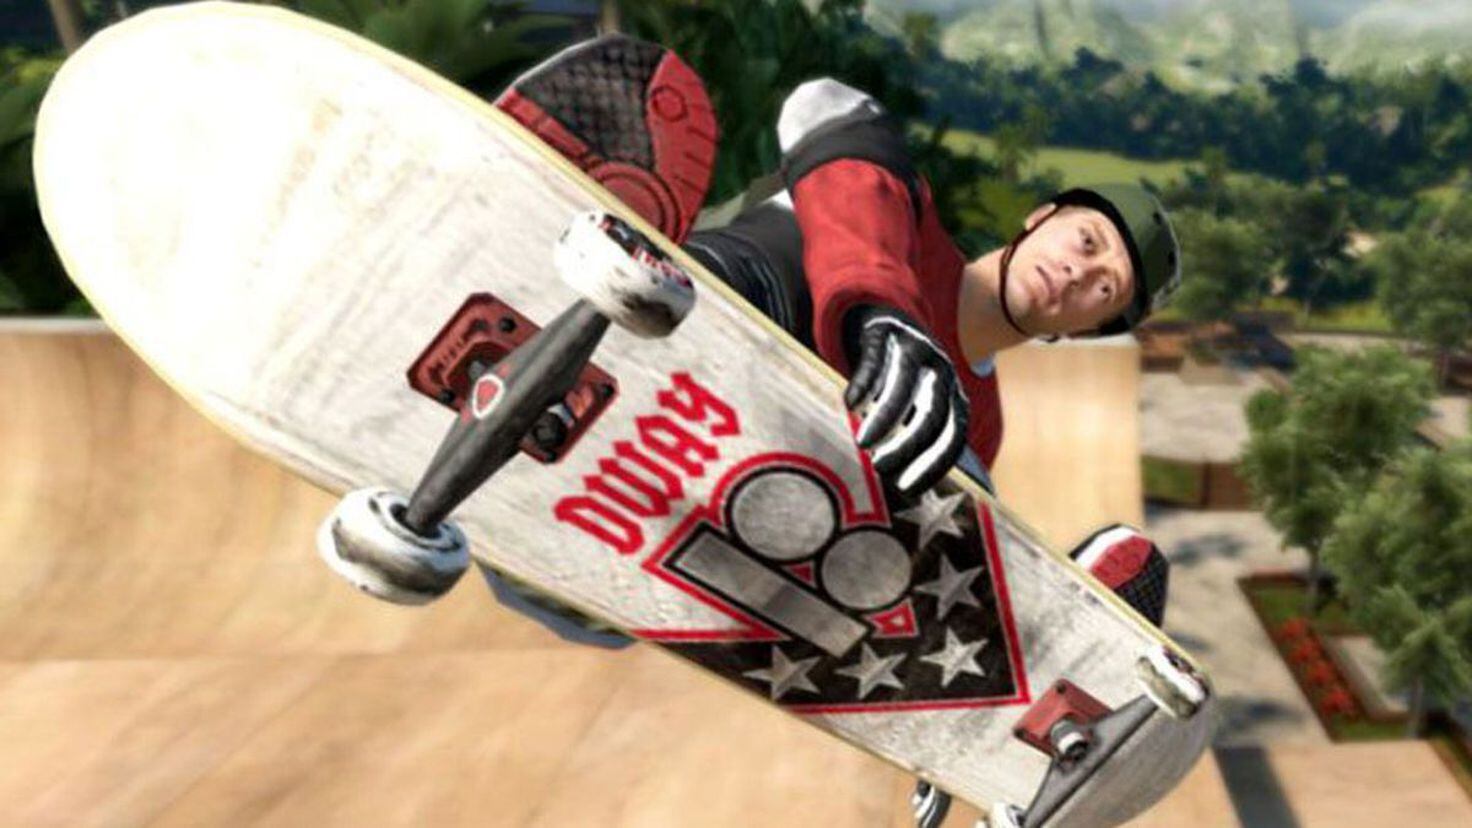 New “Skate 4” Footage RELEASED 